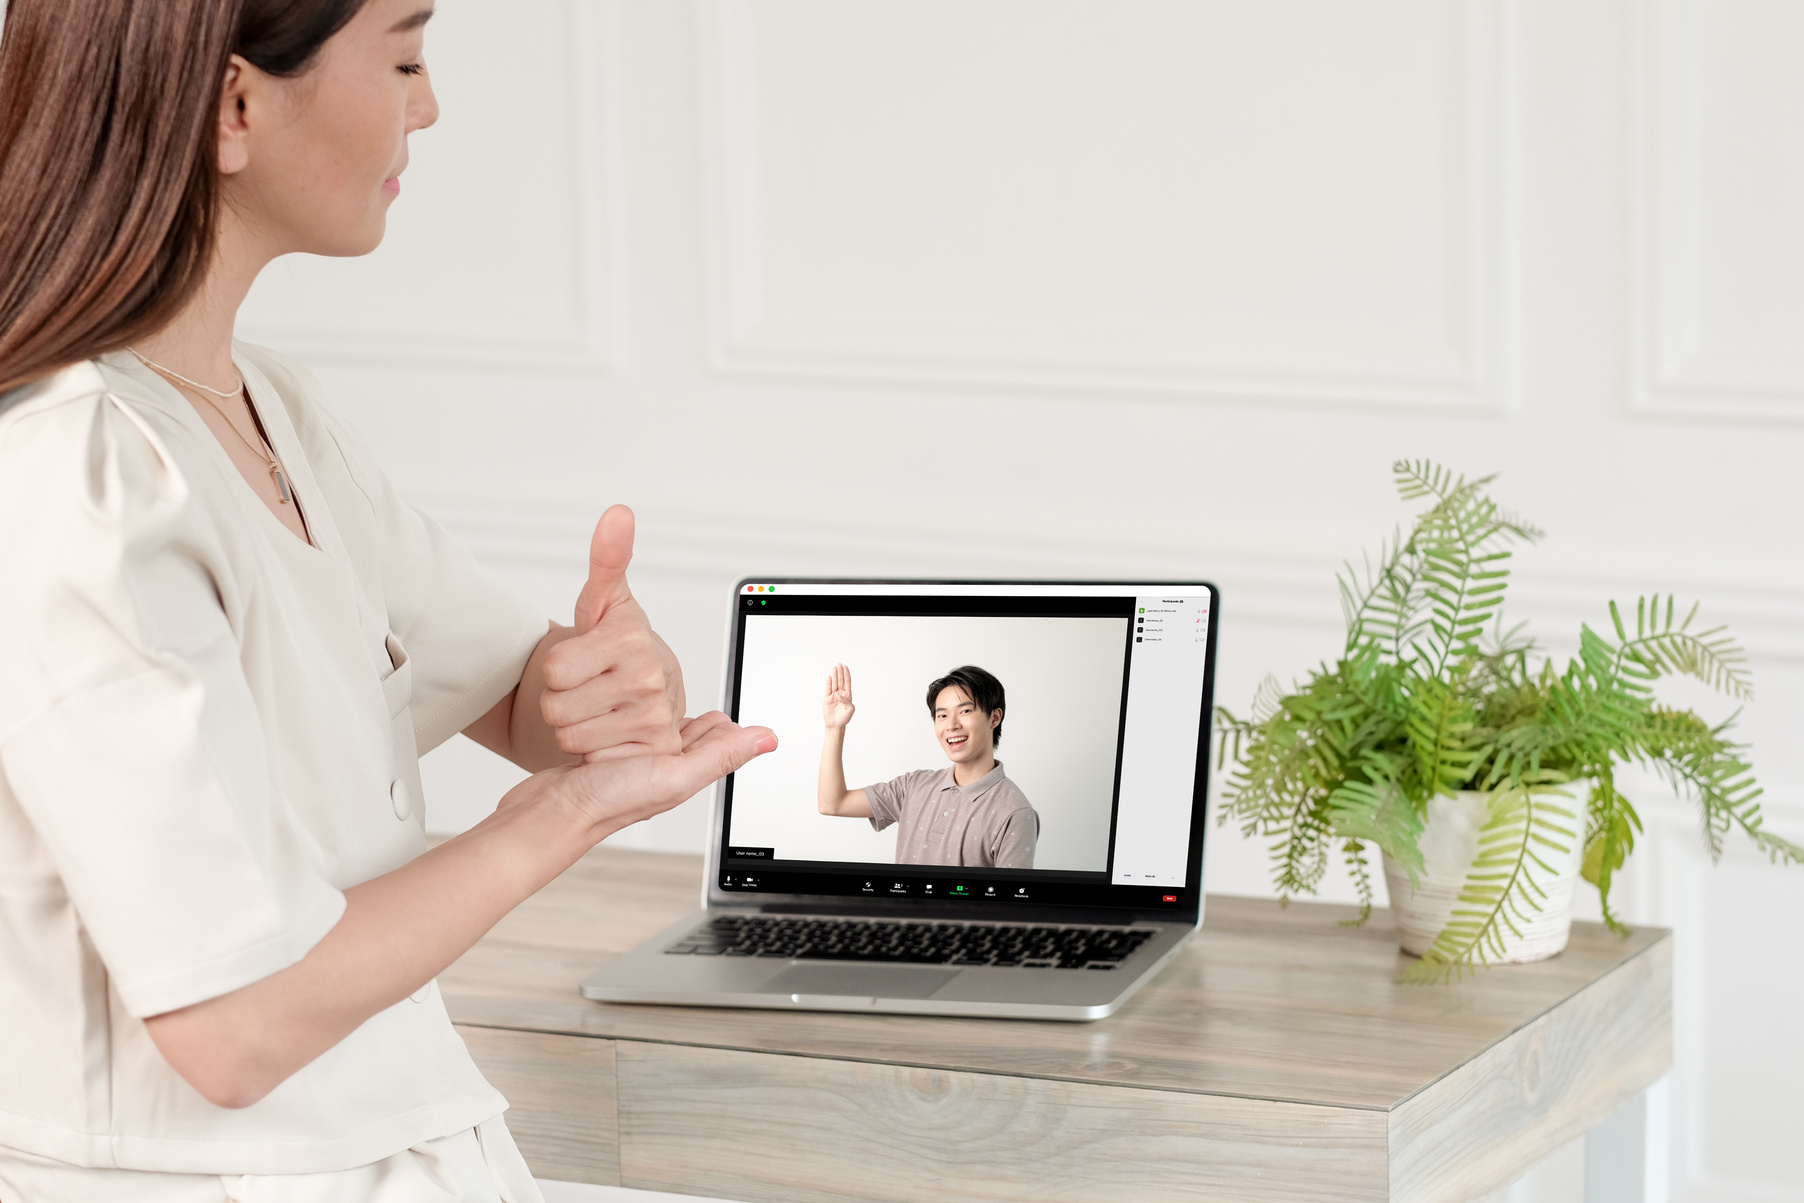 Man and Woman Communicating in Sign Language Via Zoom Call